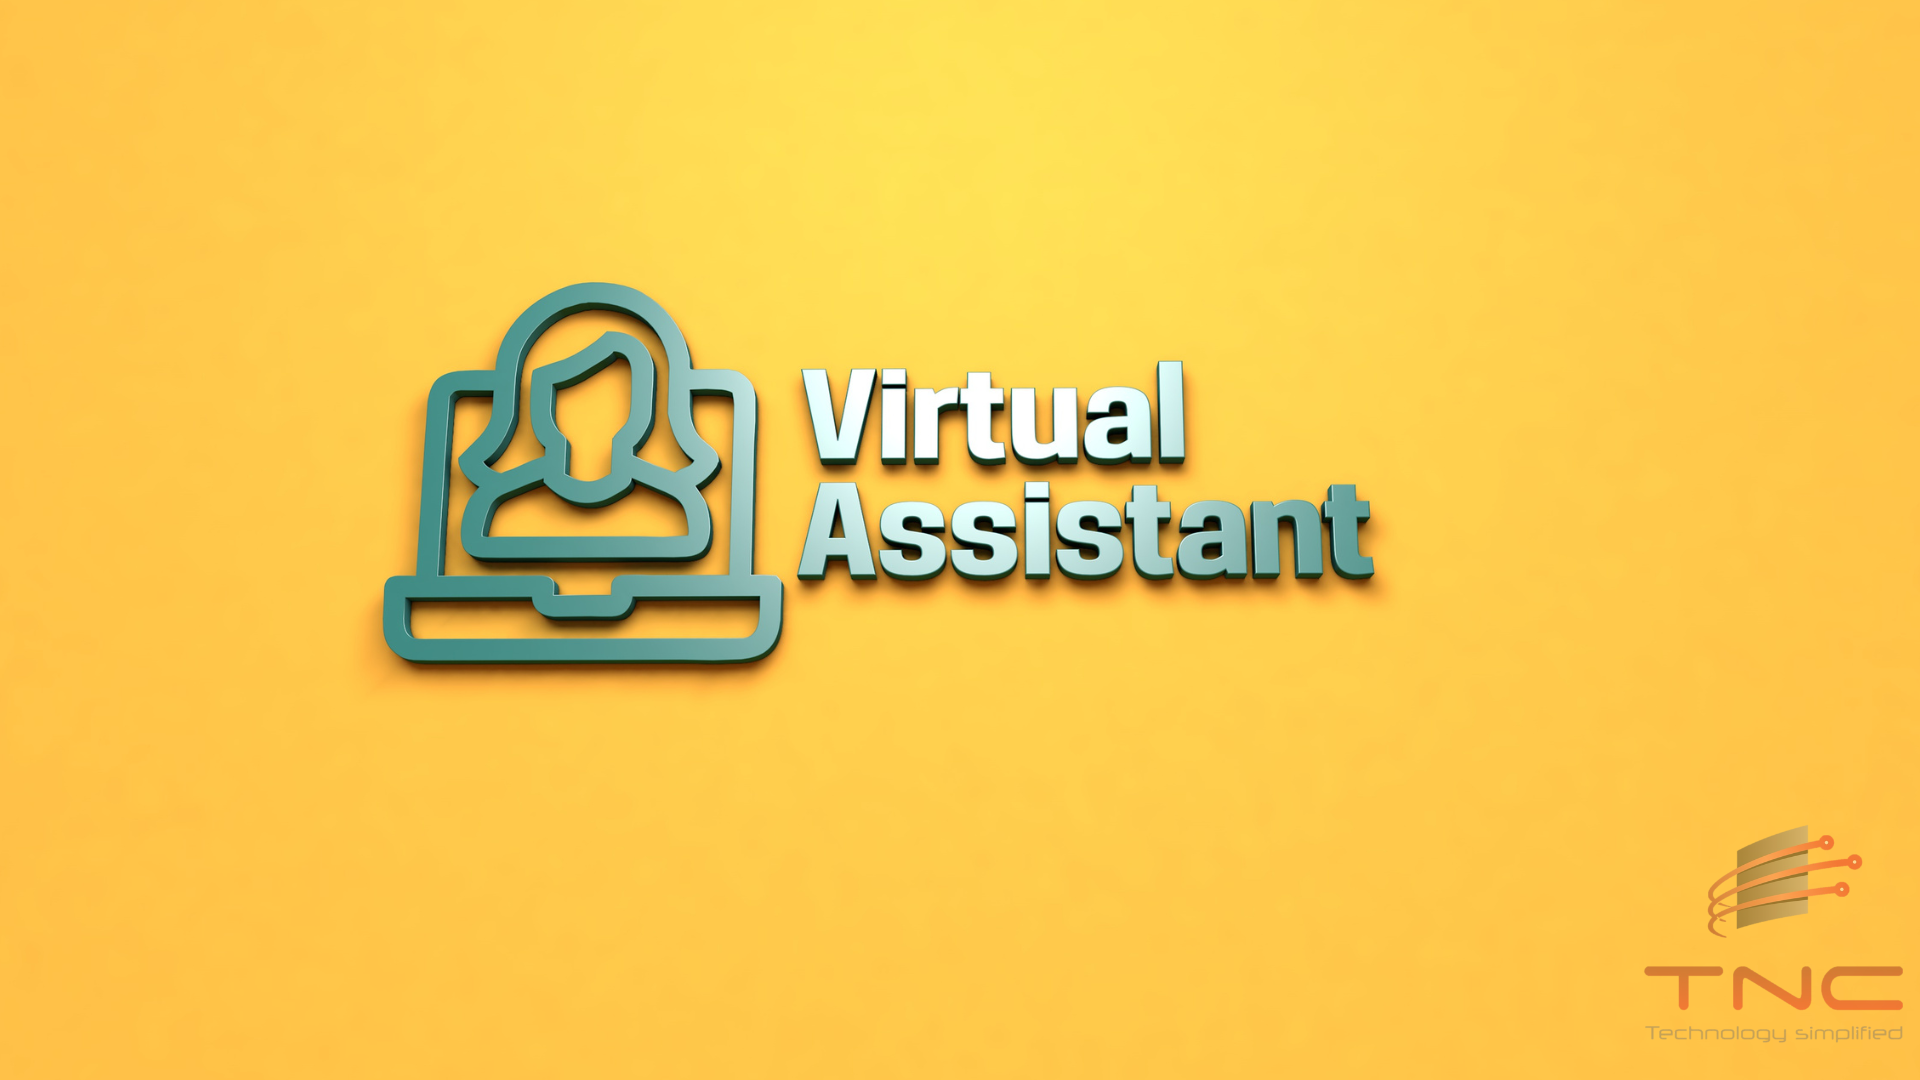 A text of virtual assistant with a yellow background